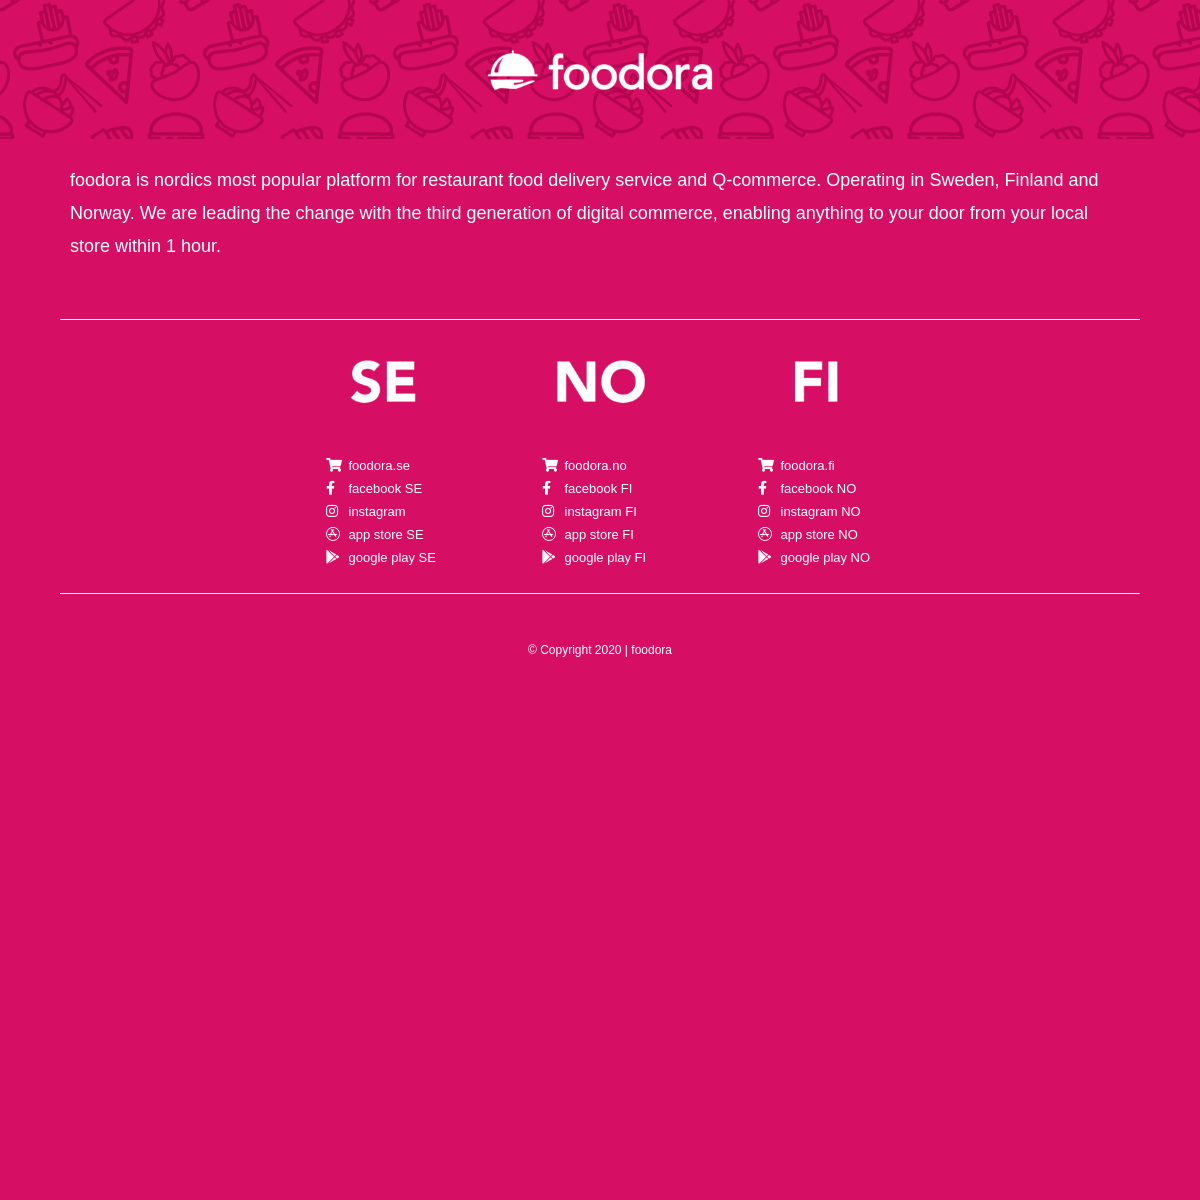 A complete backup of foodora.ca